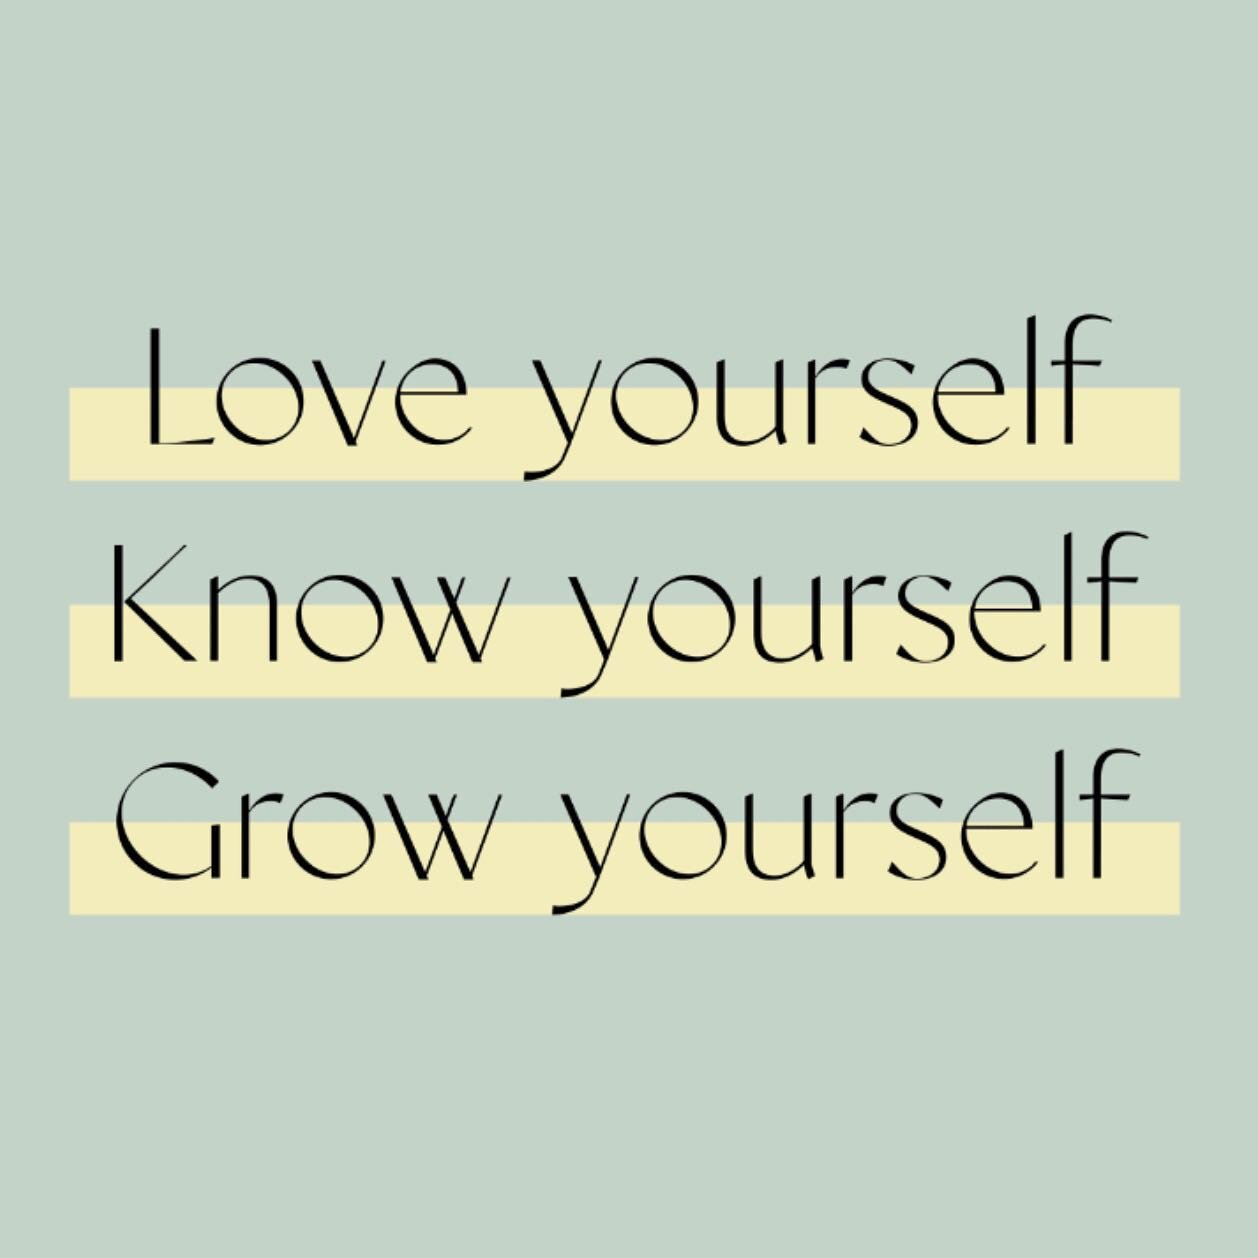 We grow stronger individually, collectively, personally and professionally. We are a community that encourages support,
growth, excellence and camaraderie; somewhere we can all learn to &quot;Love Yourself. Know Yourself. Grow Yourself.&rdquo;